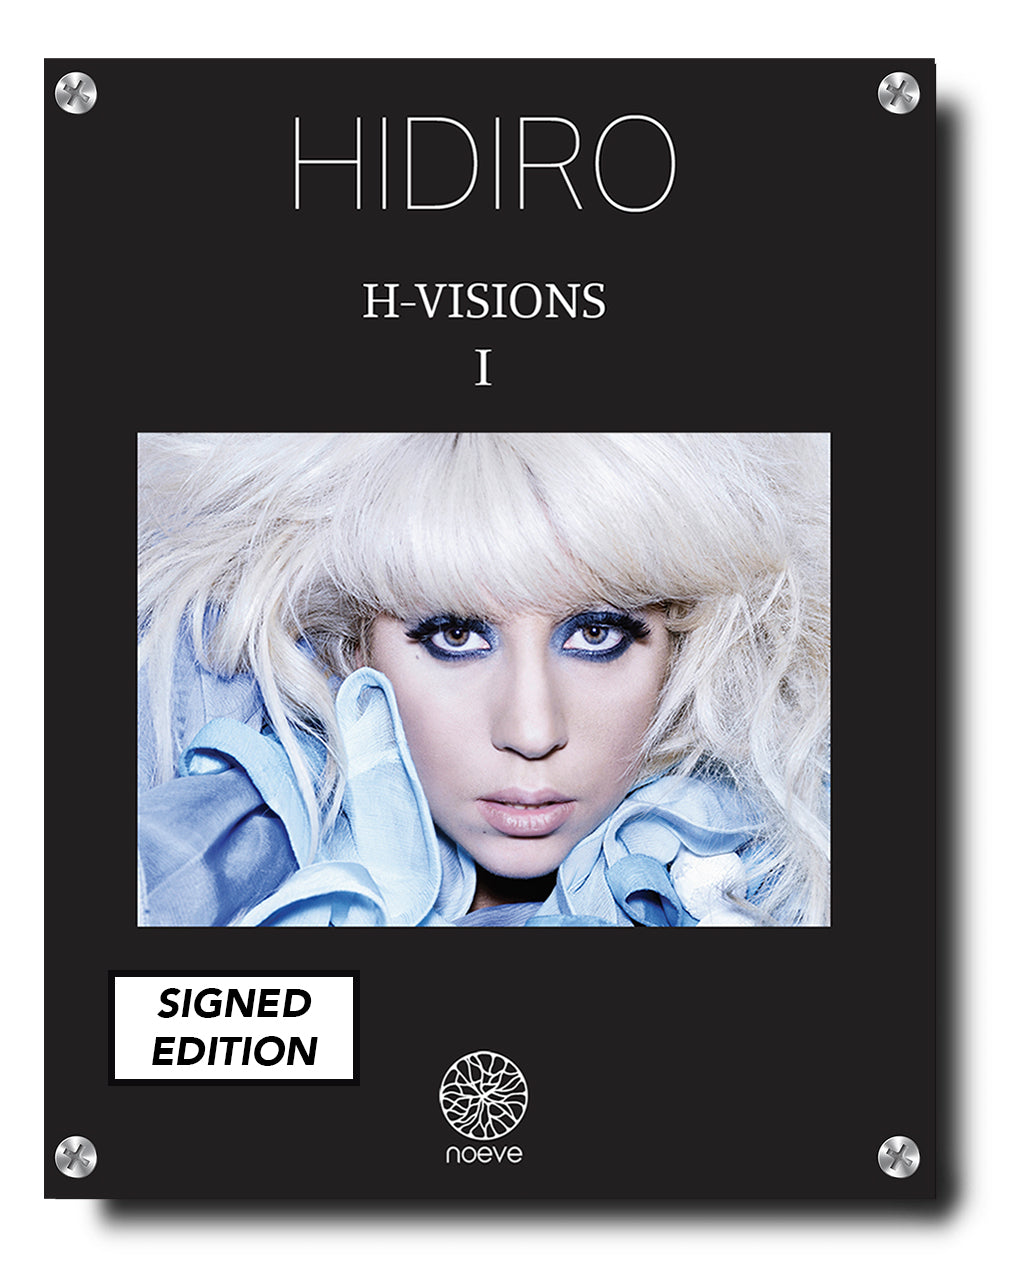 H-VISIONS 1 (Préface Benjamin BIOLAY) - Signed Edition